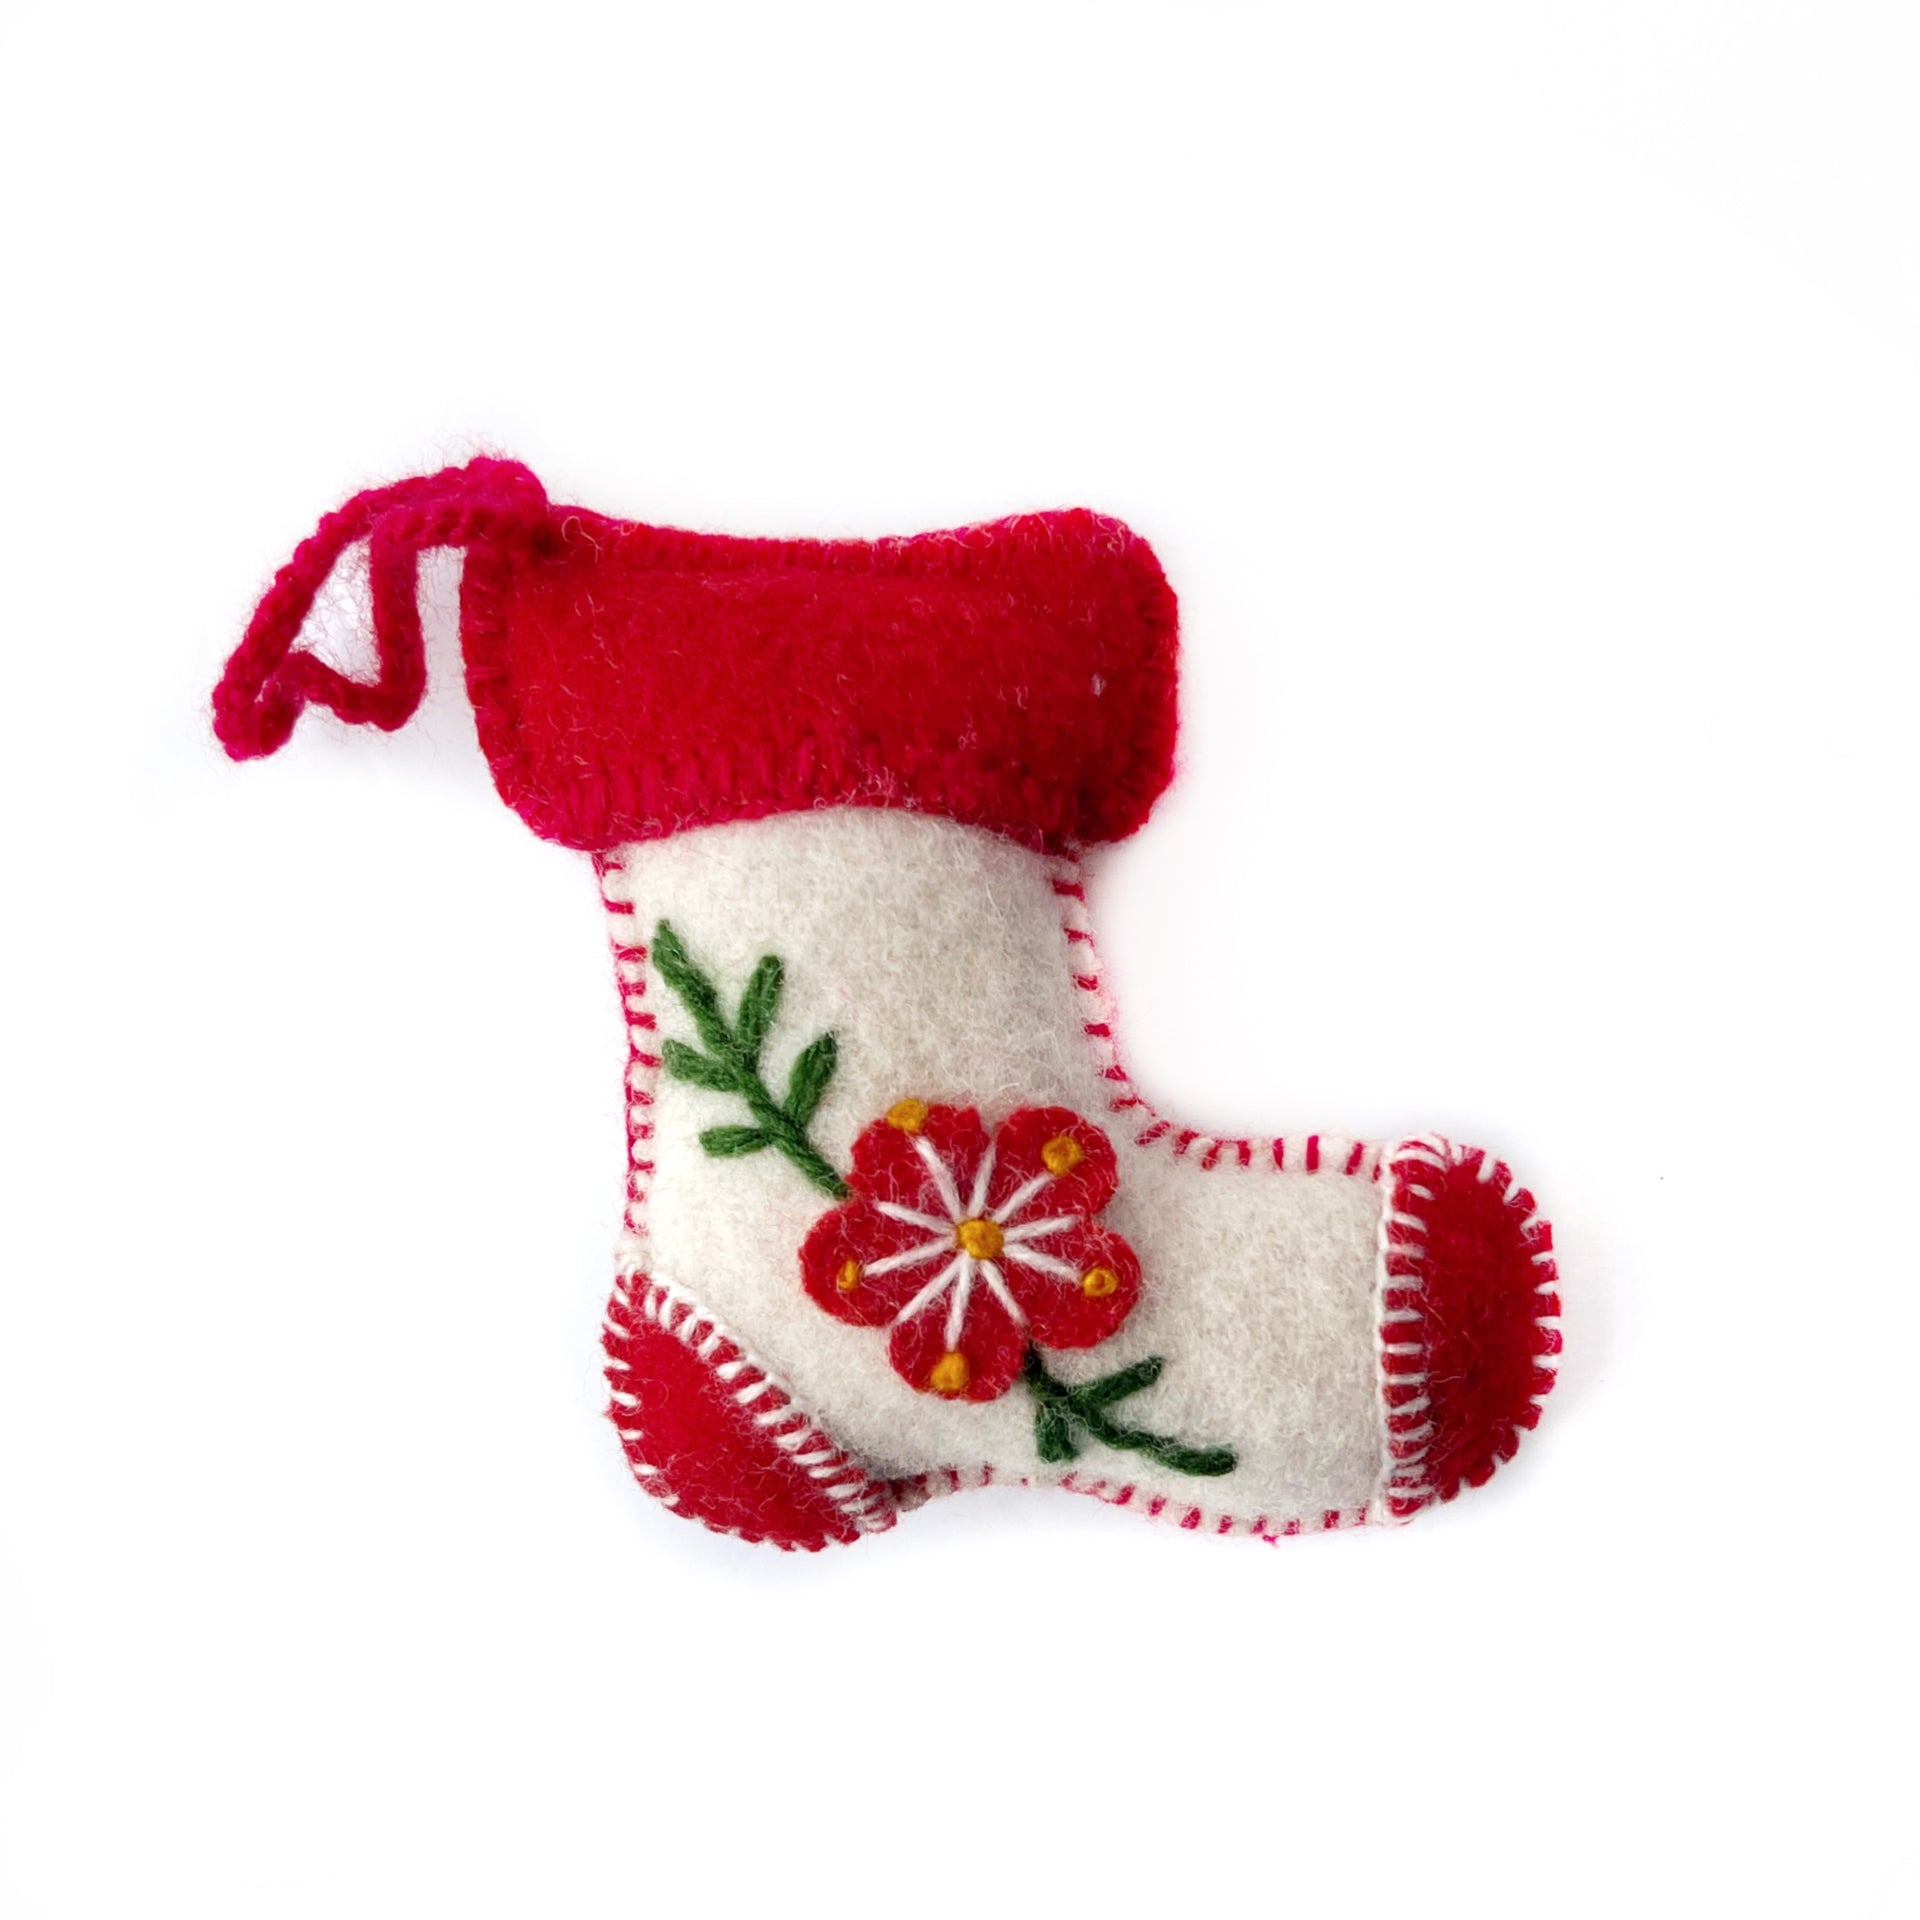 White Stocking Ornament, Embroidered Wool